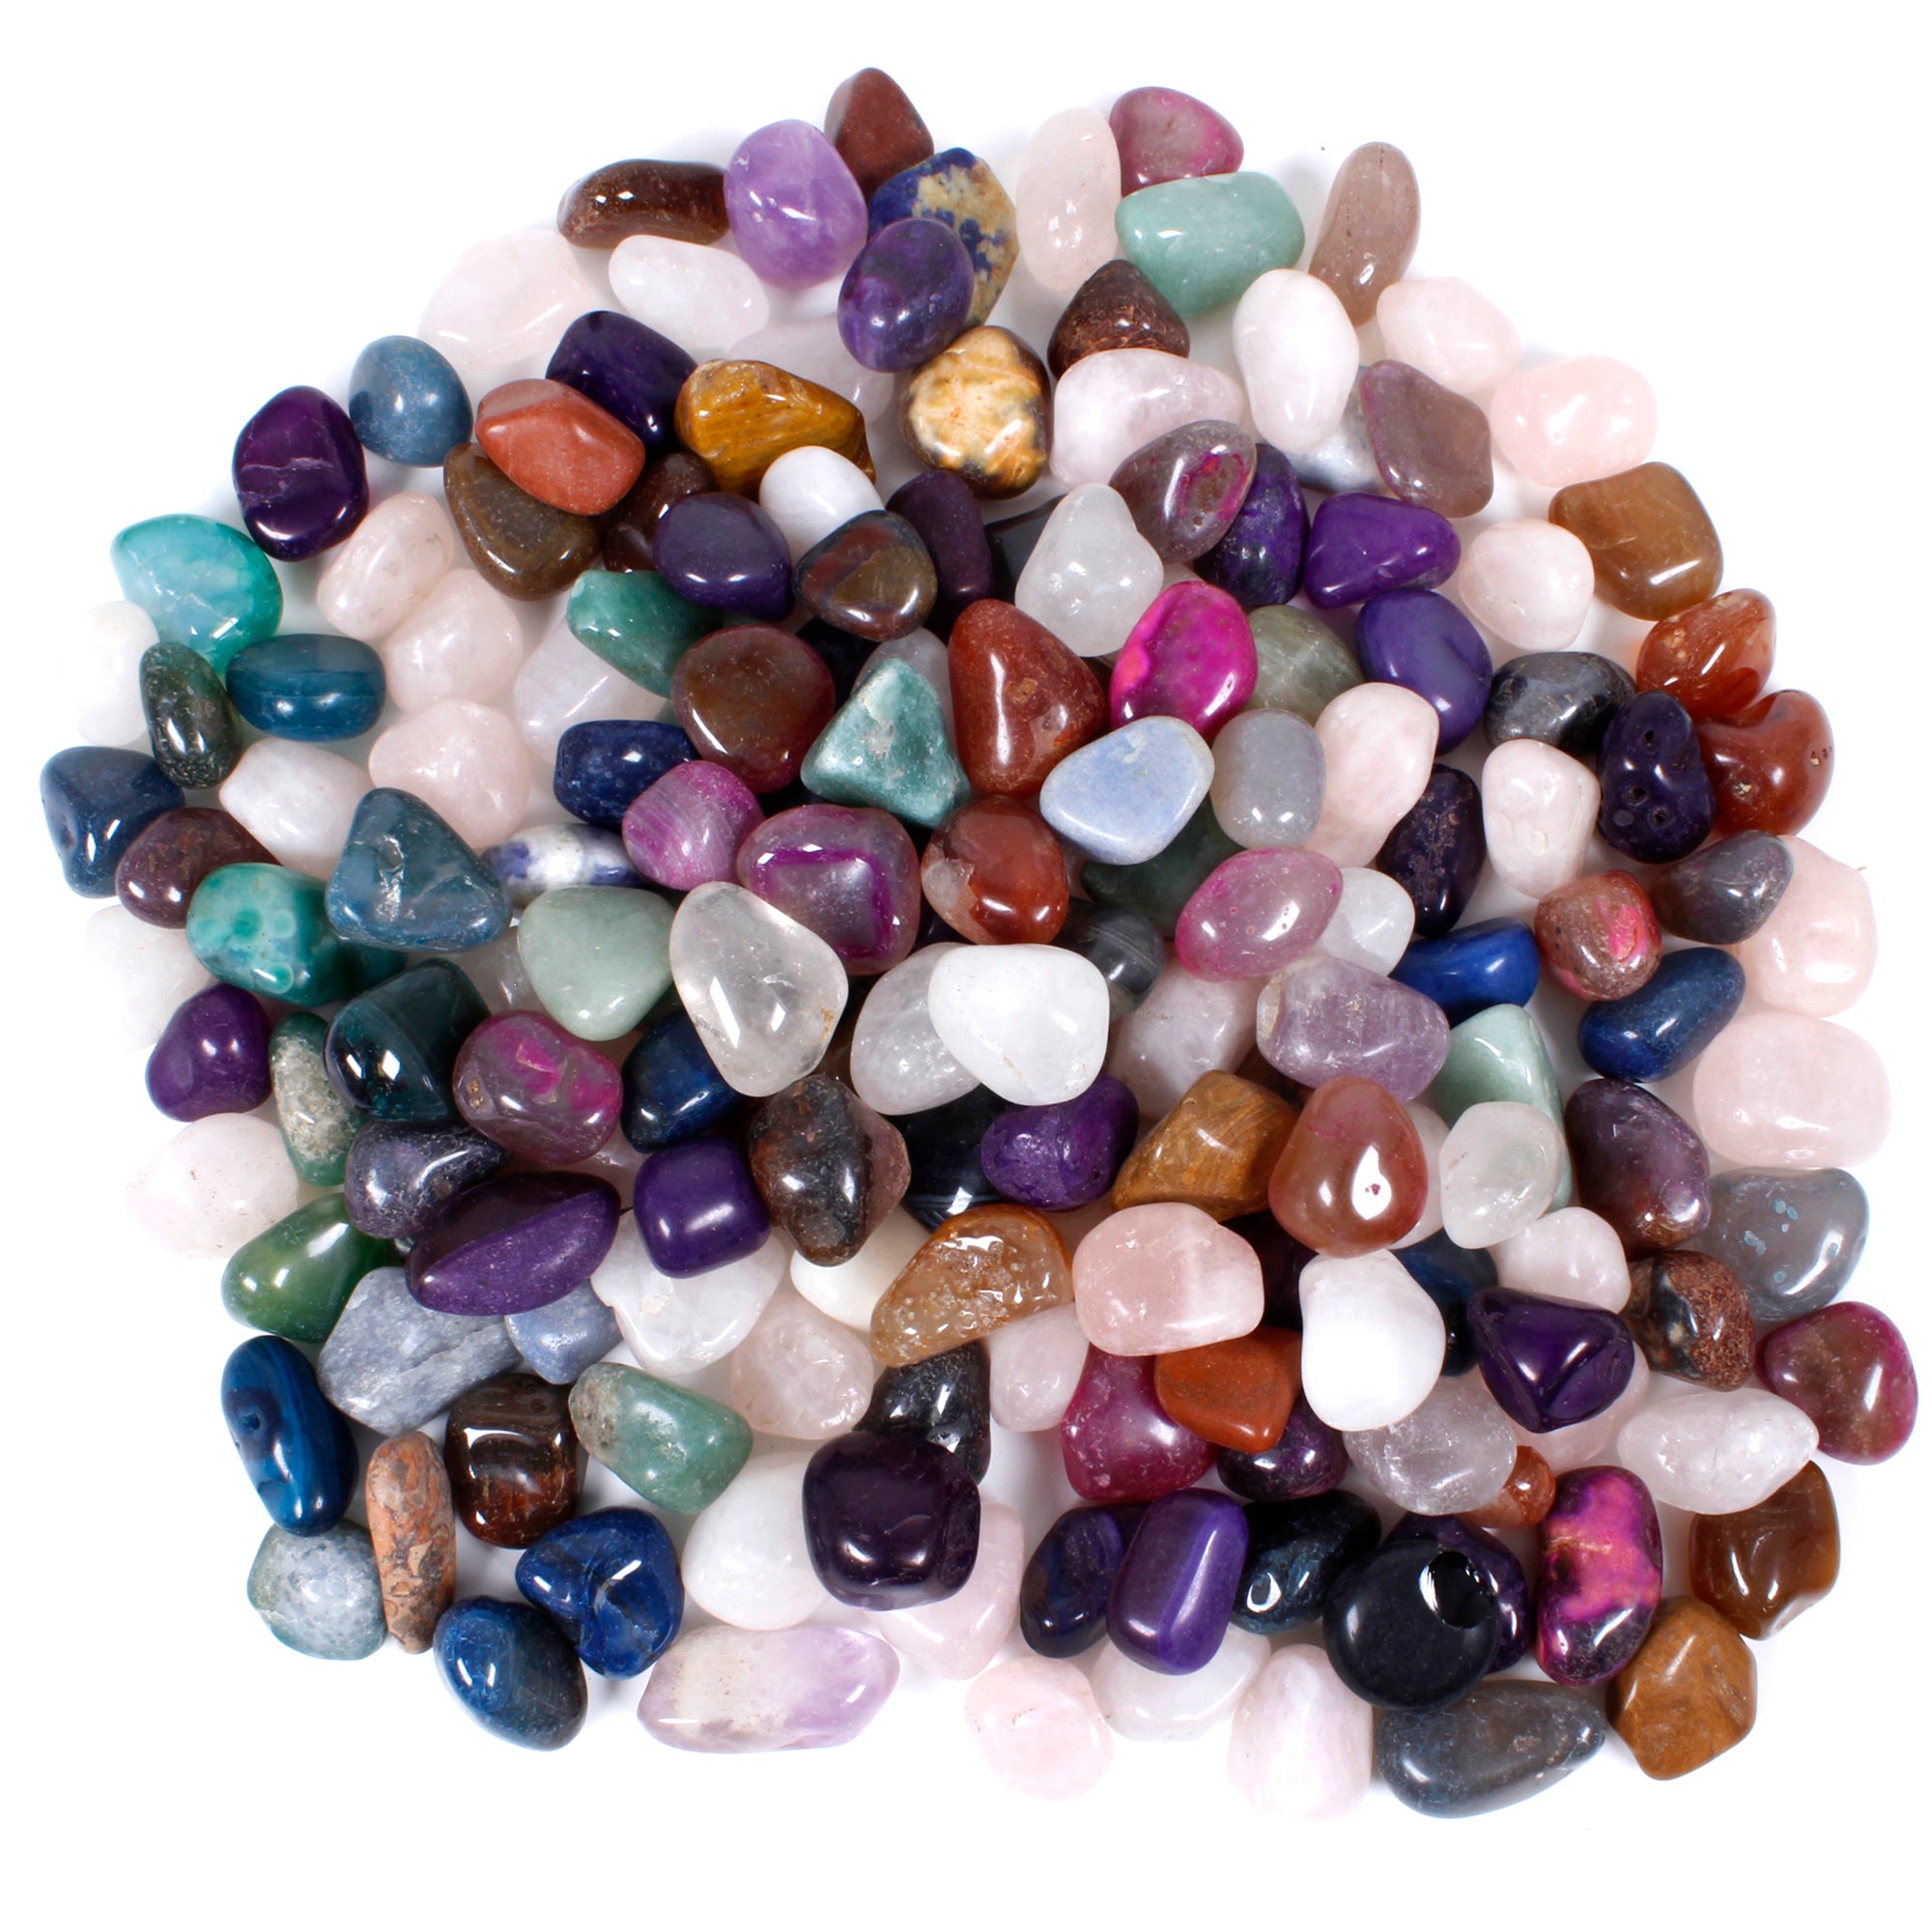 Tumbled Polished Natural and Dyed Gem Stones. Average Size 1 inch. Cho –  Dancing Bear's Rocks and Minerals